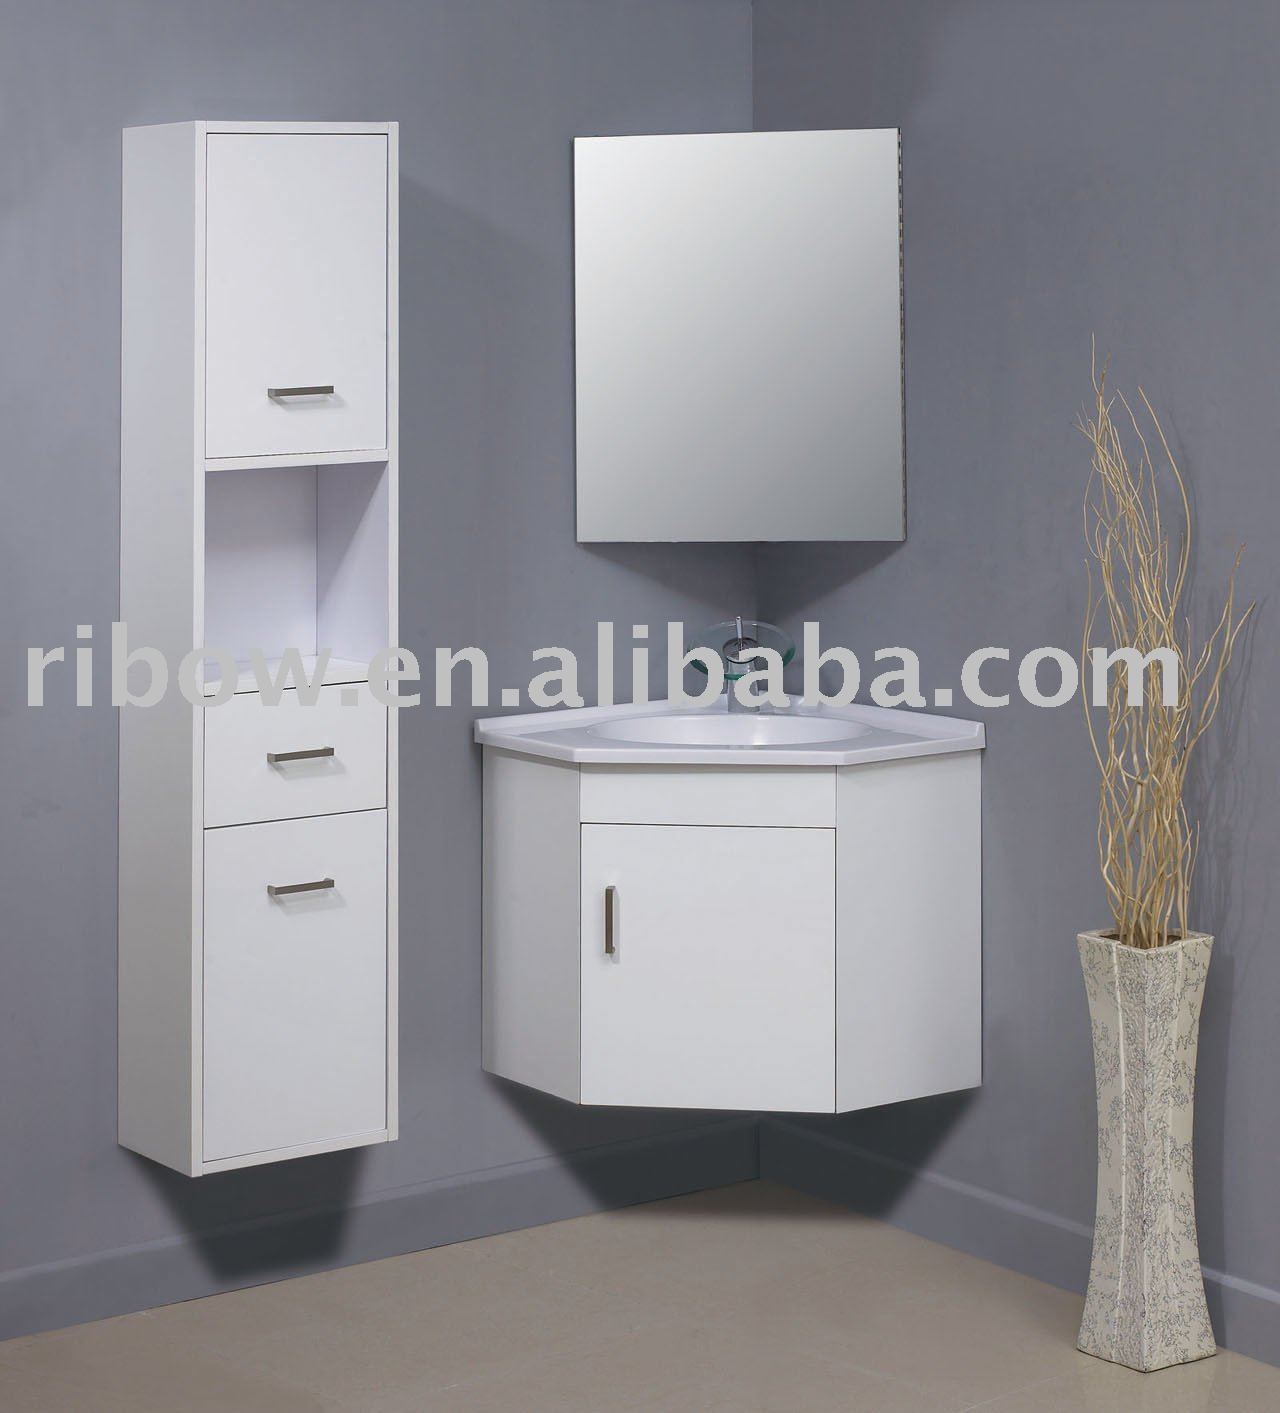 CORNER WALL CABI- FURNITURE - COMPARE PRICES, REVIEWS AND BUY. title=